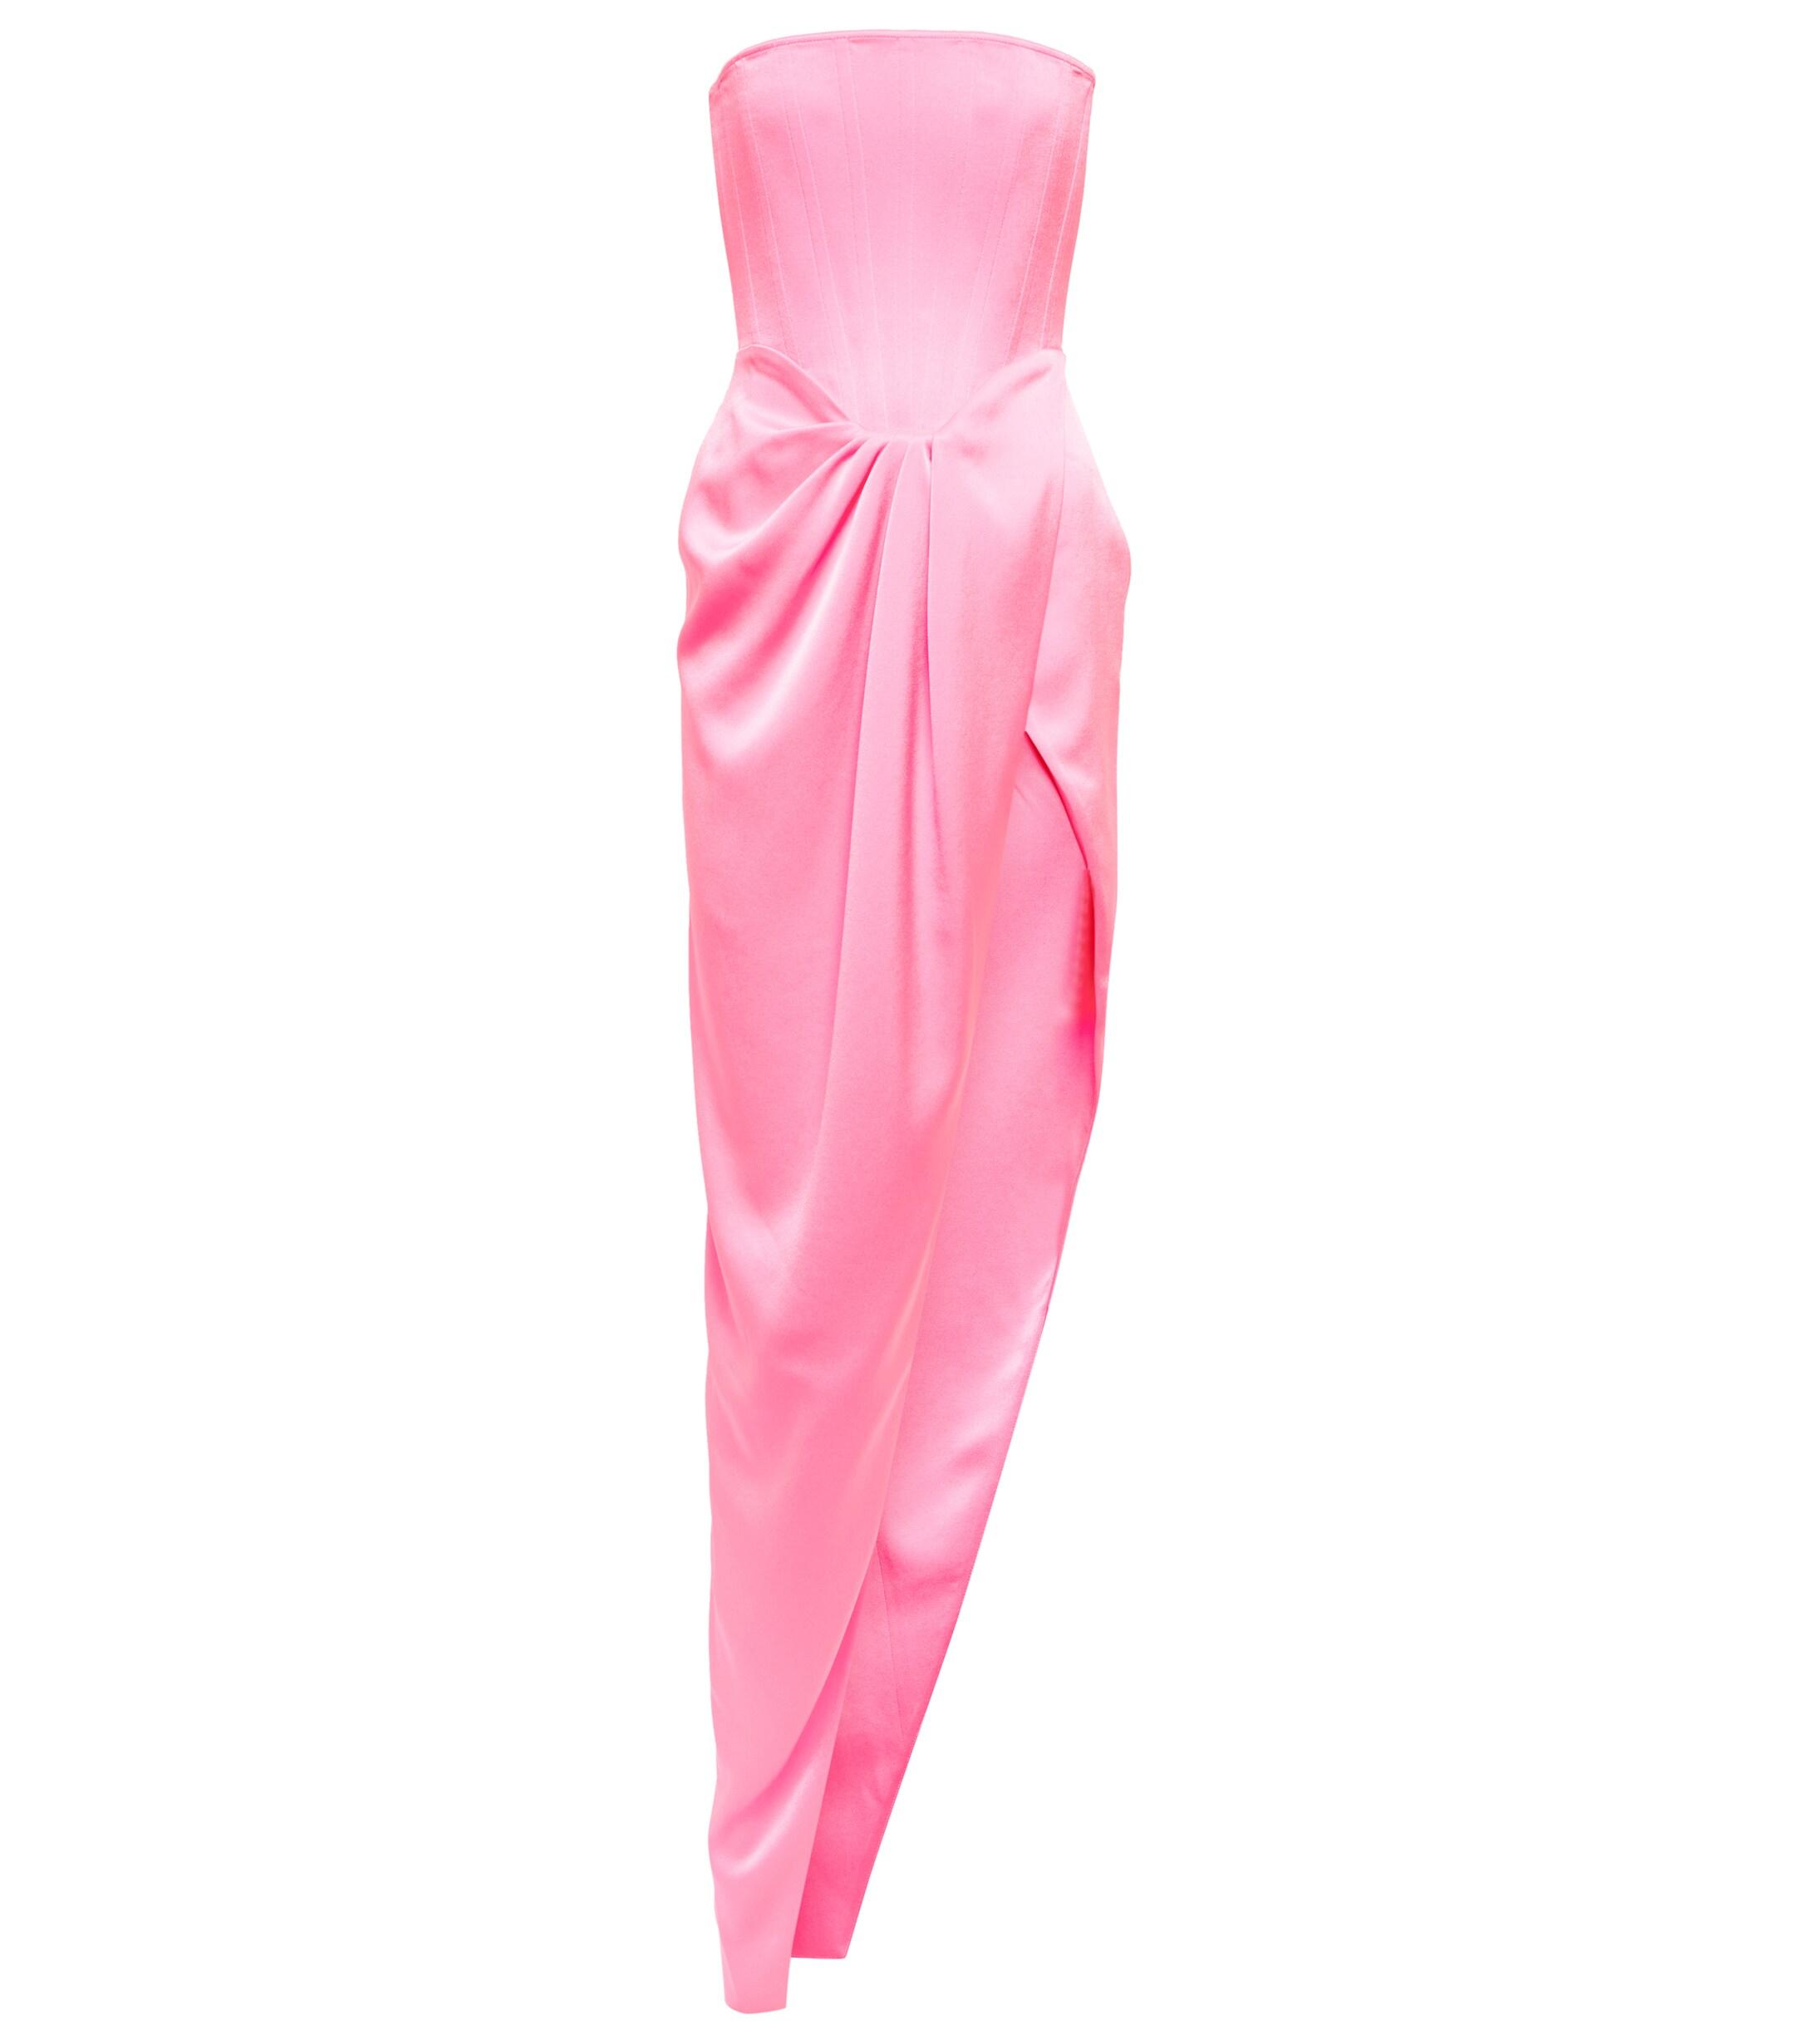 Alex Perry Ledger Draped Satin Crêpe Gown in Pink | Lyst UK